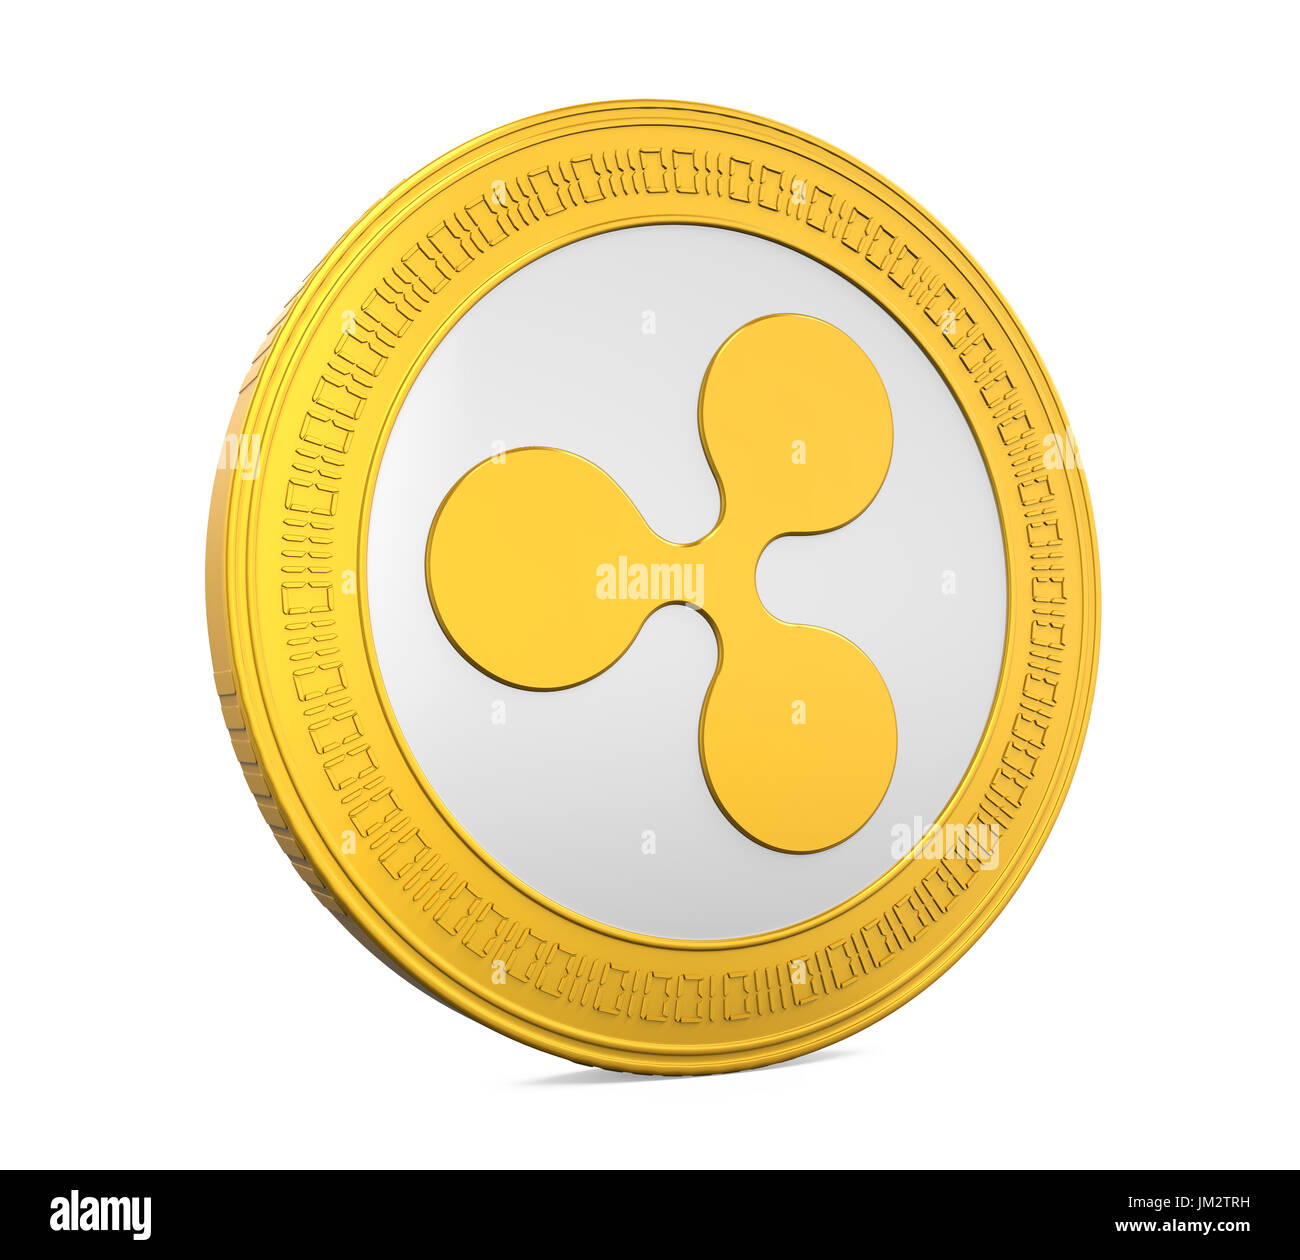 Ripple Coin High Resolution Stock Photography and Images - Alamy